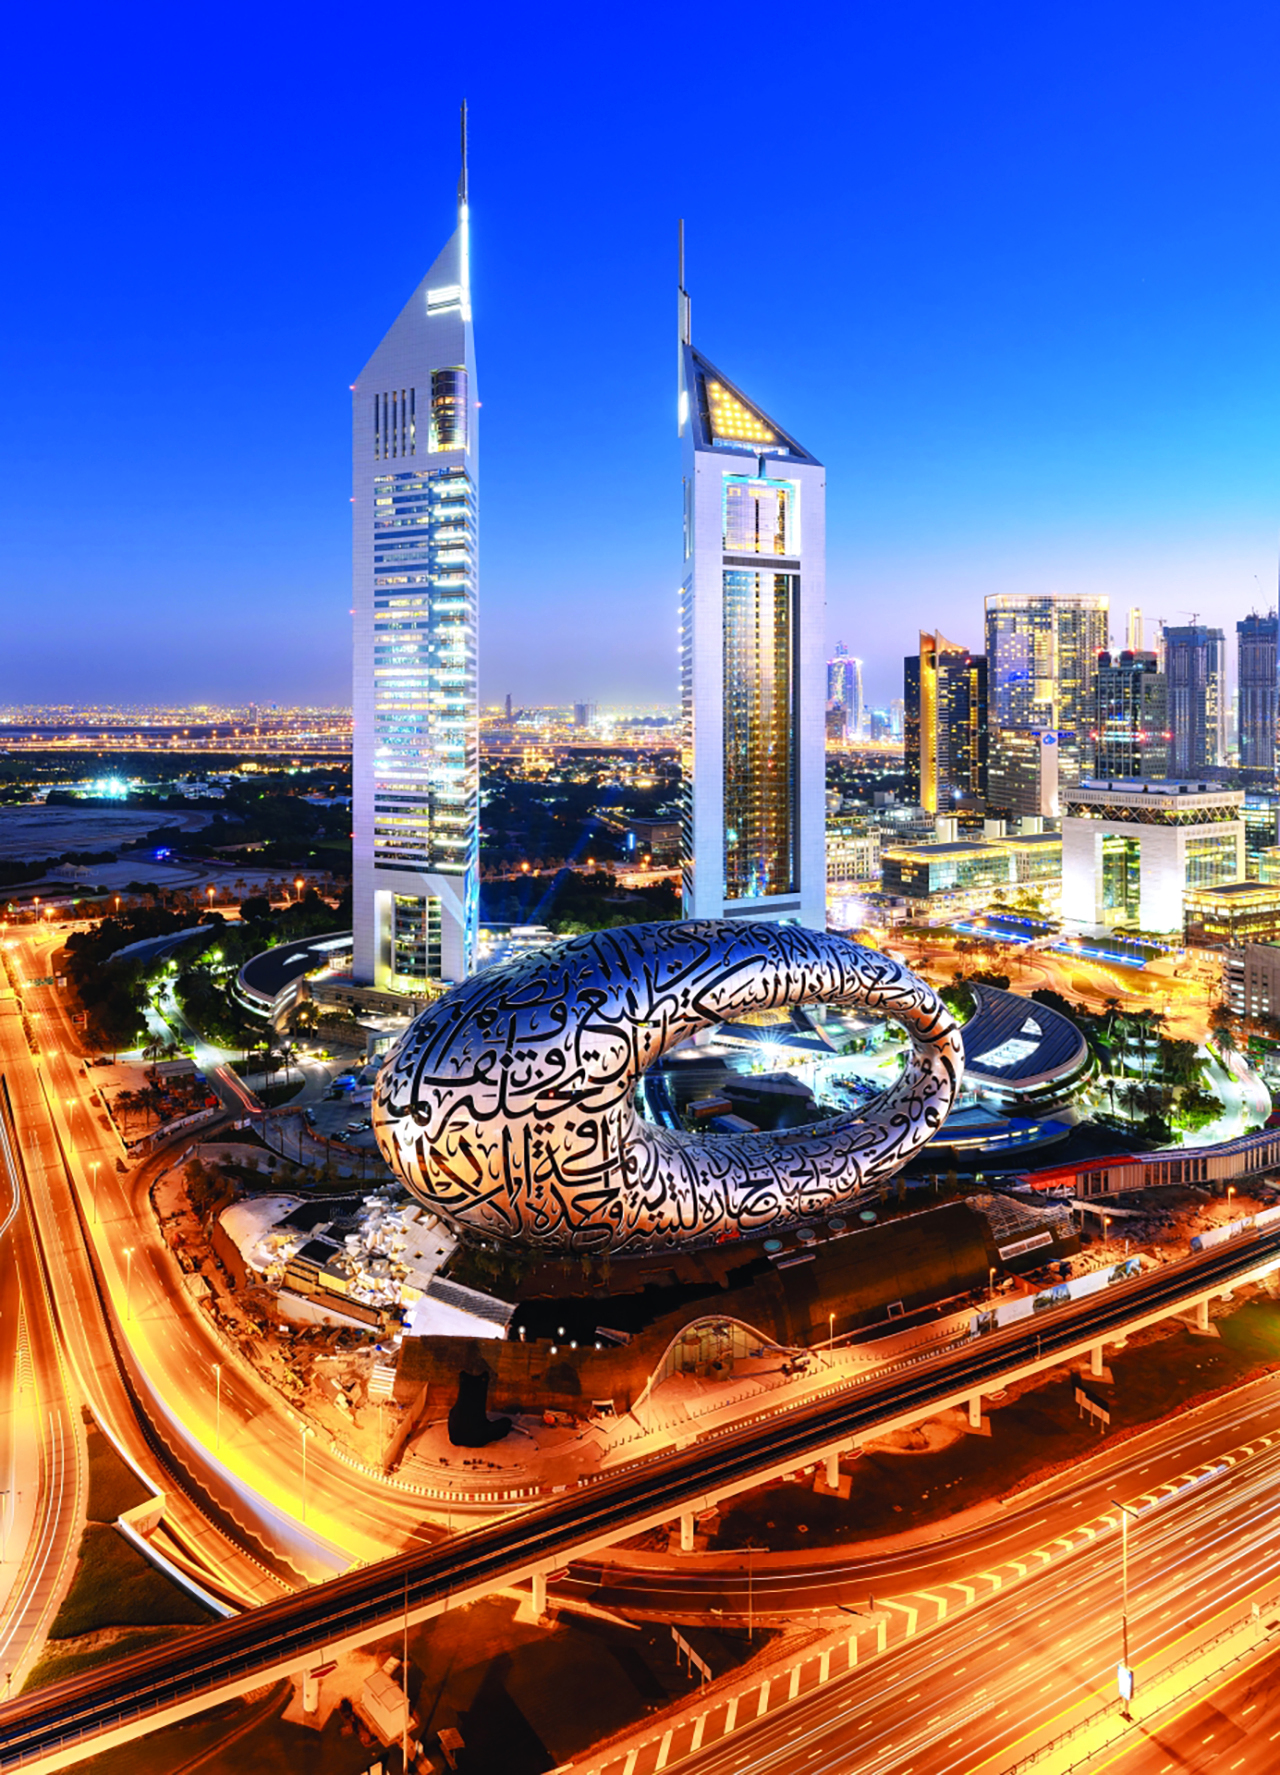 The Emirates lost its capital in the global innovation index